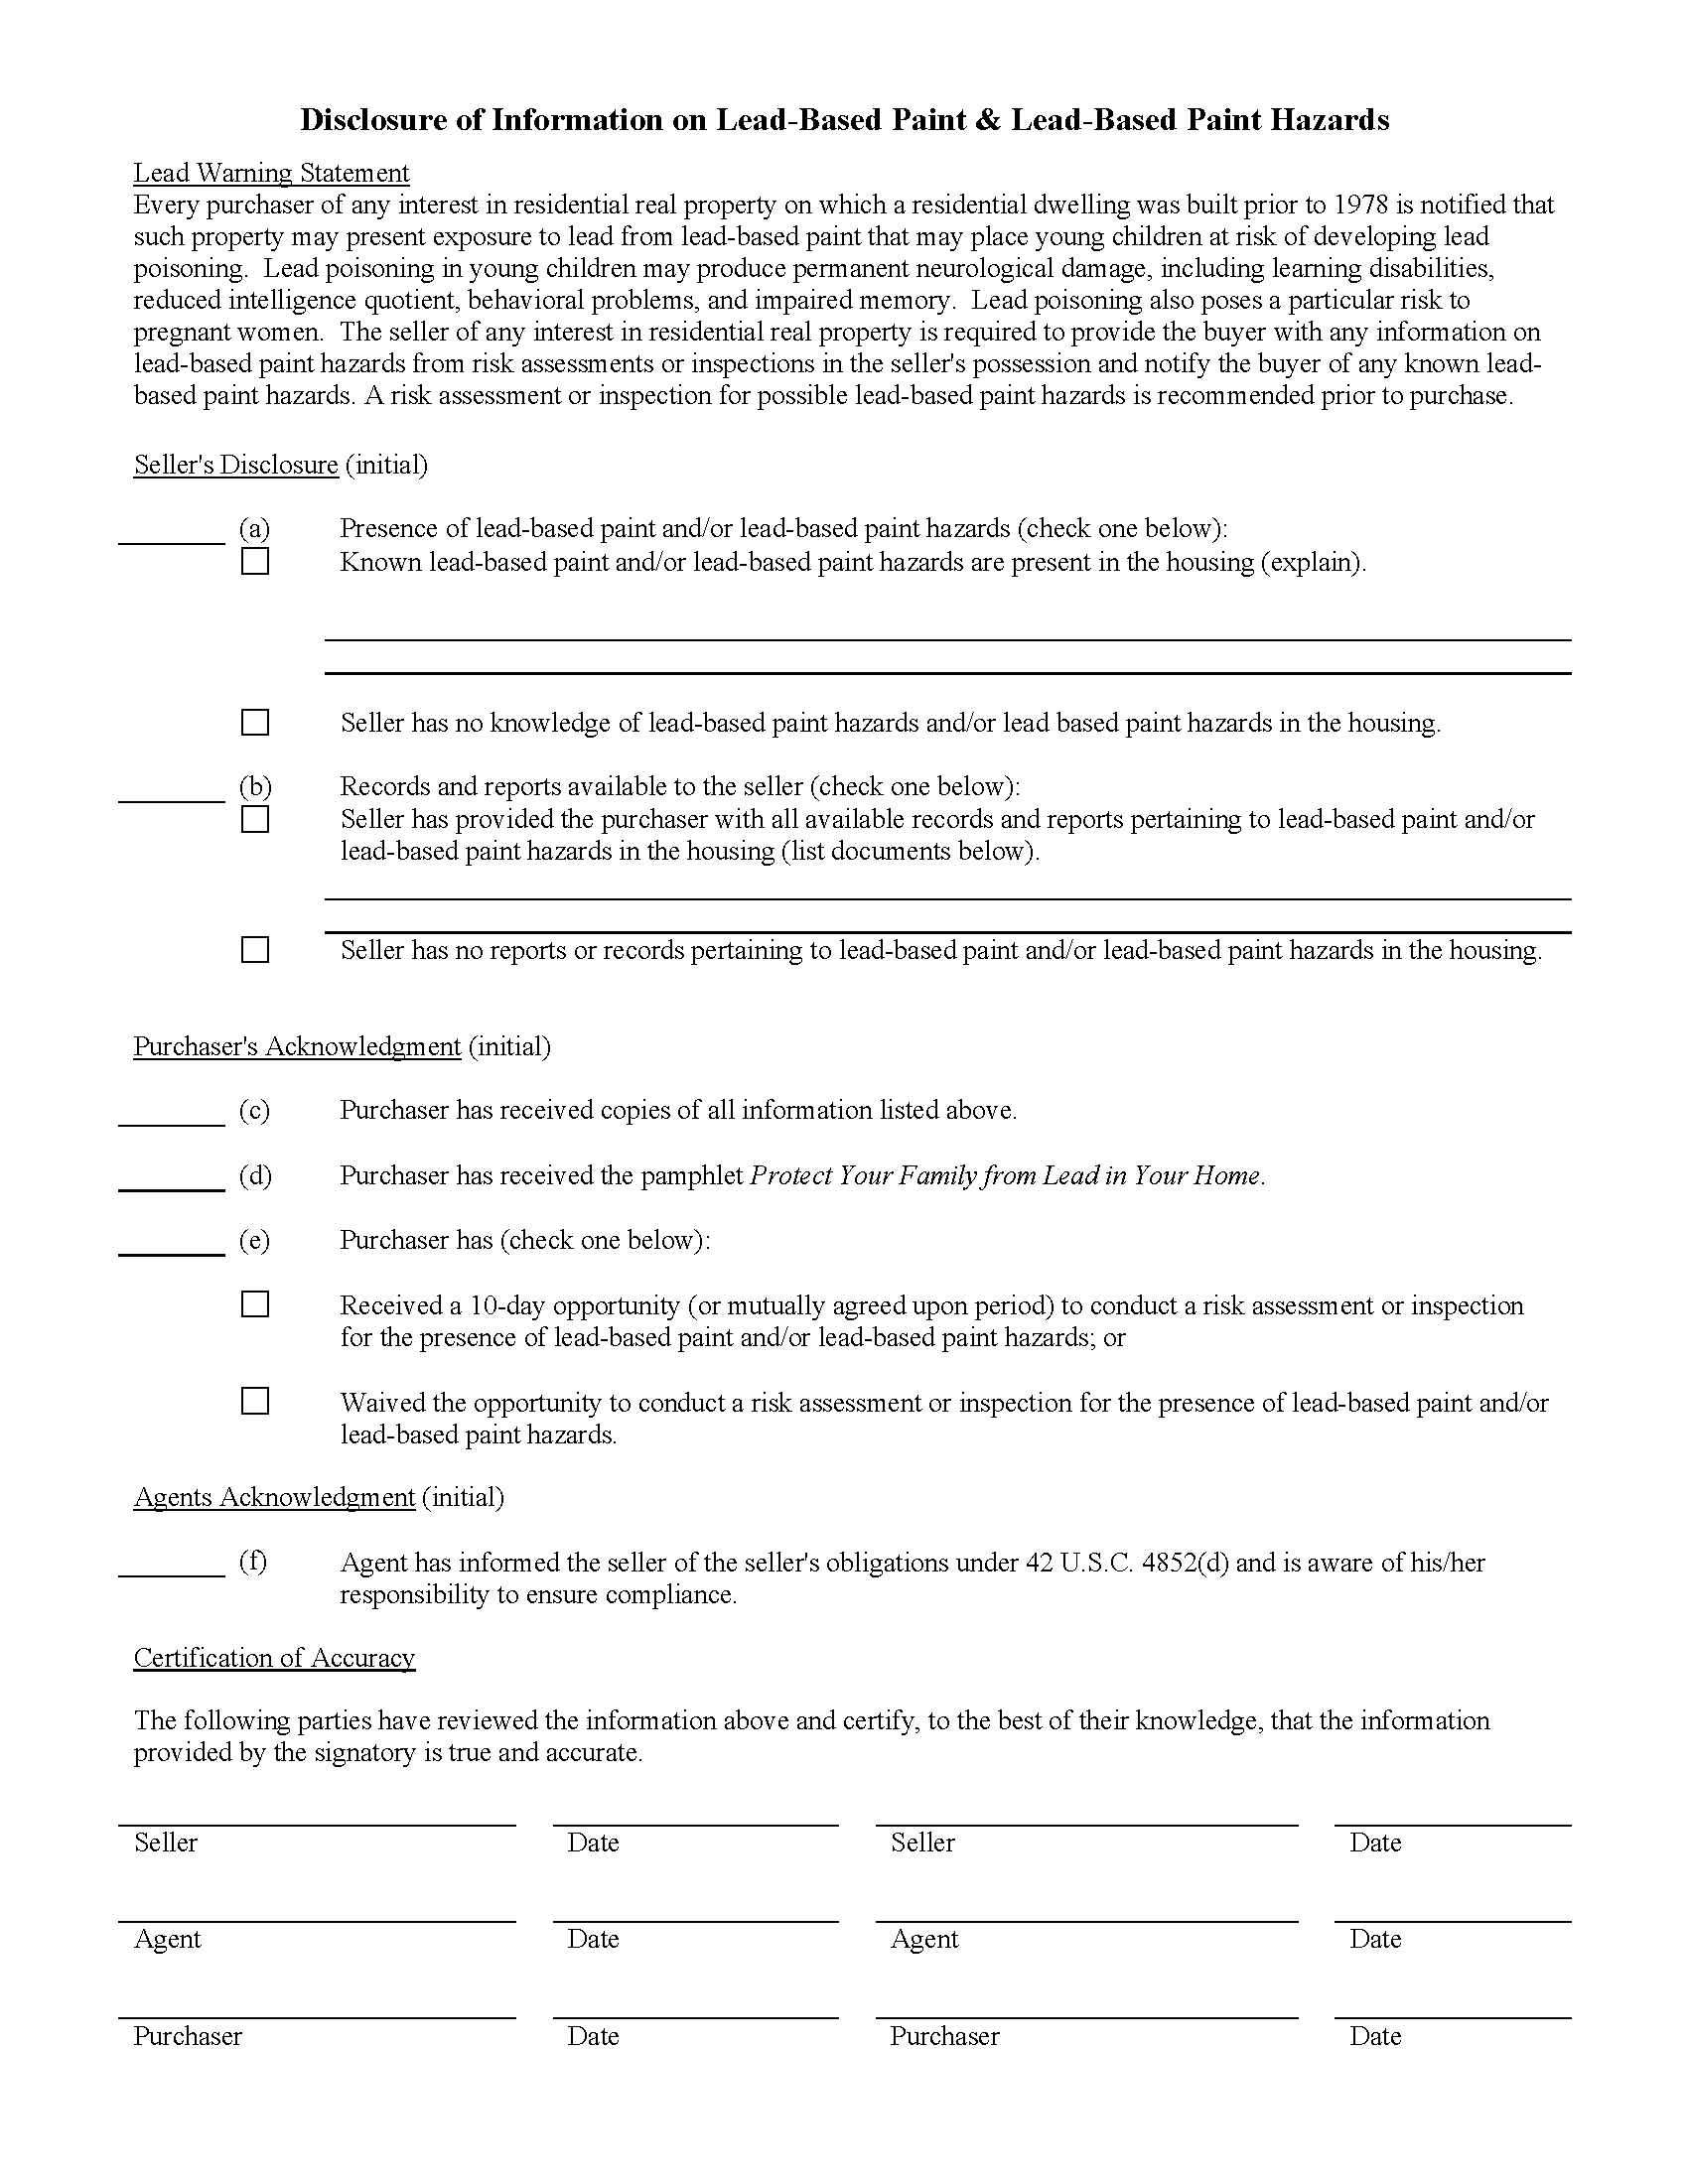 Grant County Lead Based Paint Disclosure Form